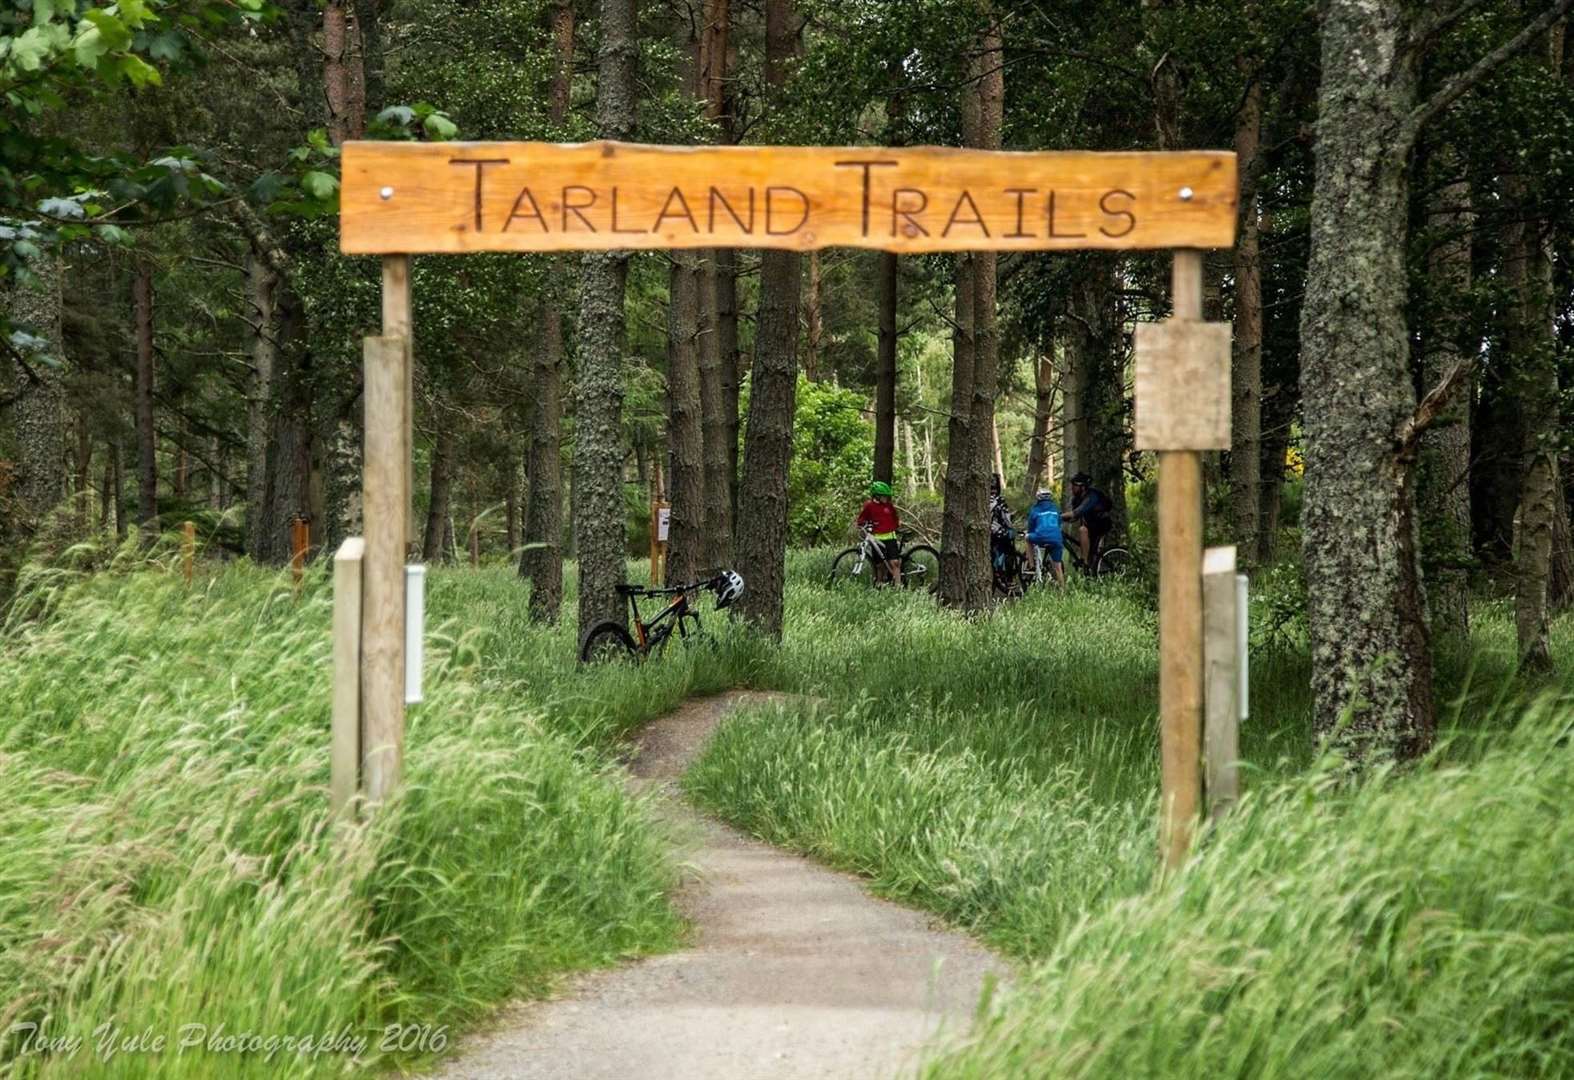 The home of the Tarland Trails